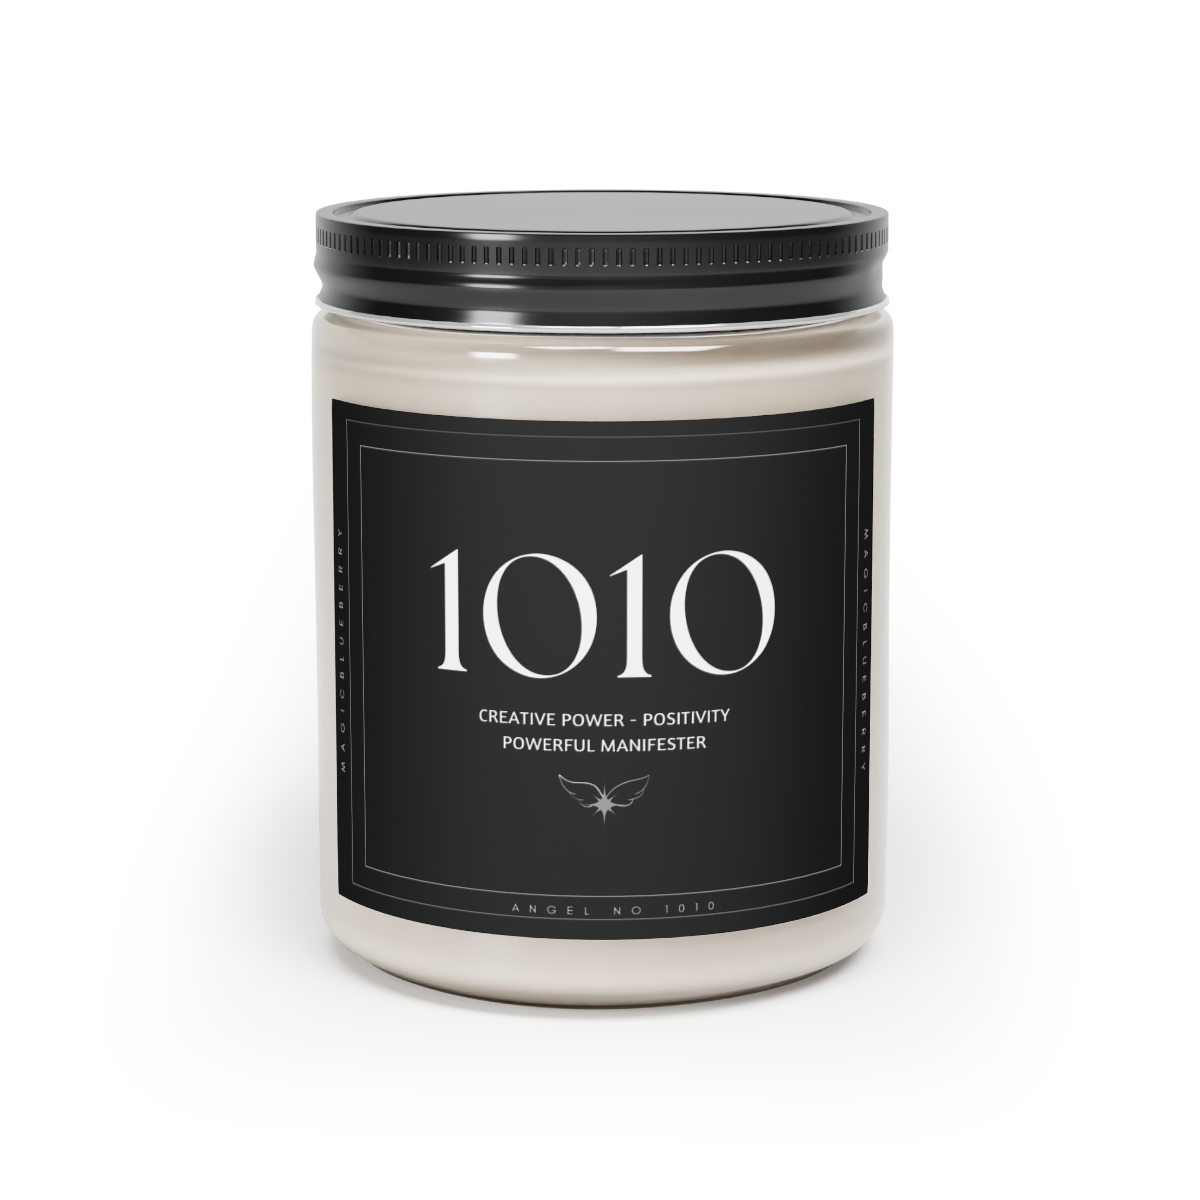 Angel Spell 1010 - Scented Vegan Soy Wax Candles, Clear Jar Candle, Spell Candles, Sassy Candle, Vegan Candle, Cotton Wick Candle product thumbnail image